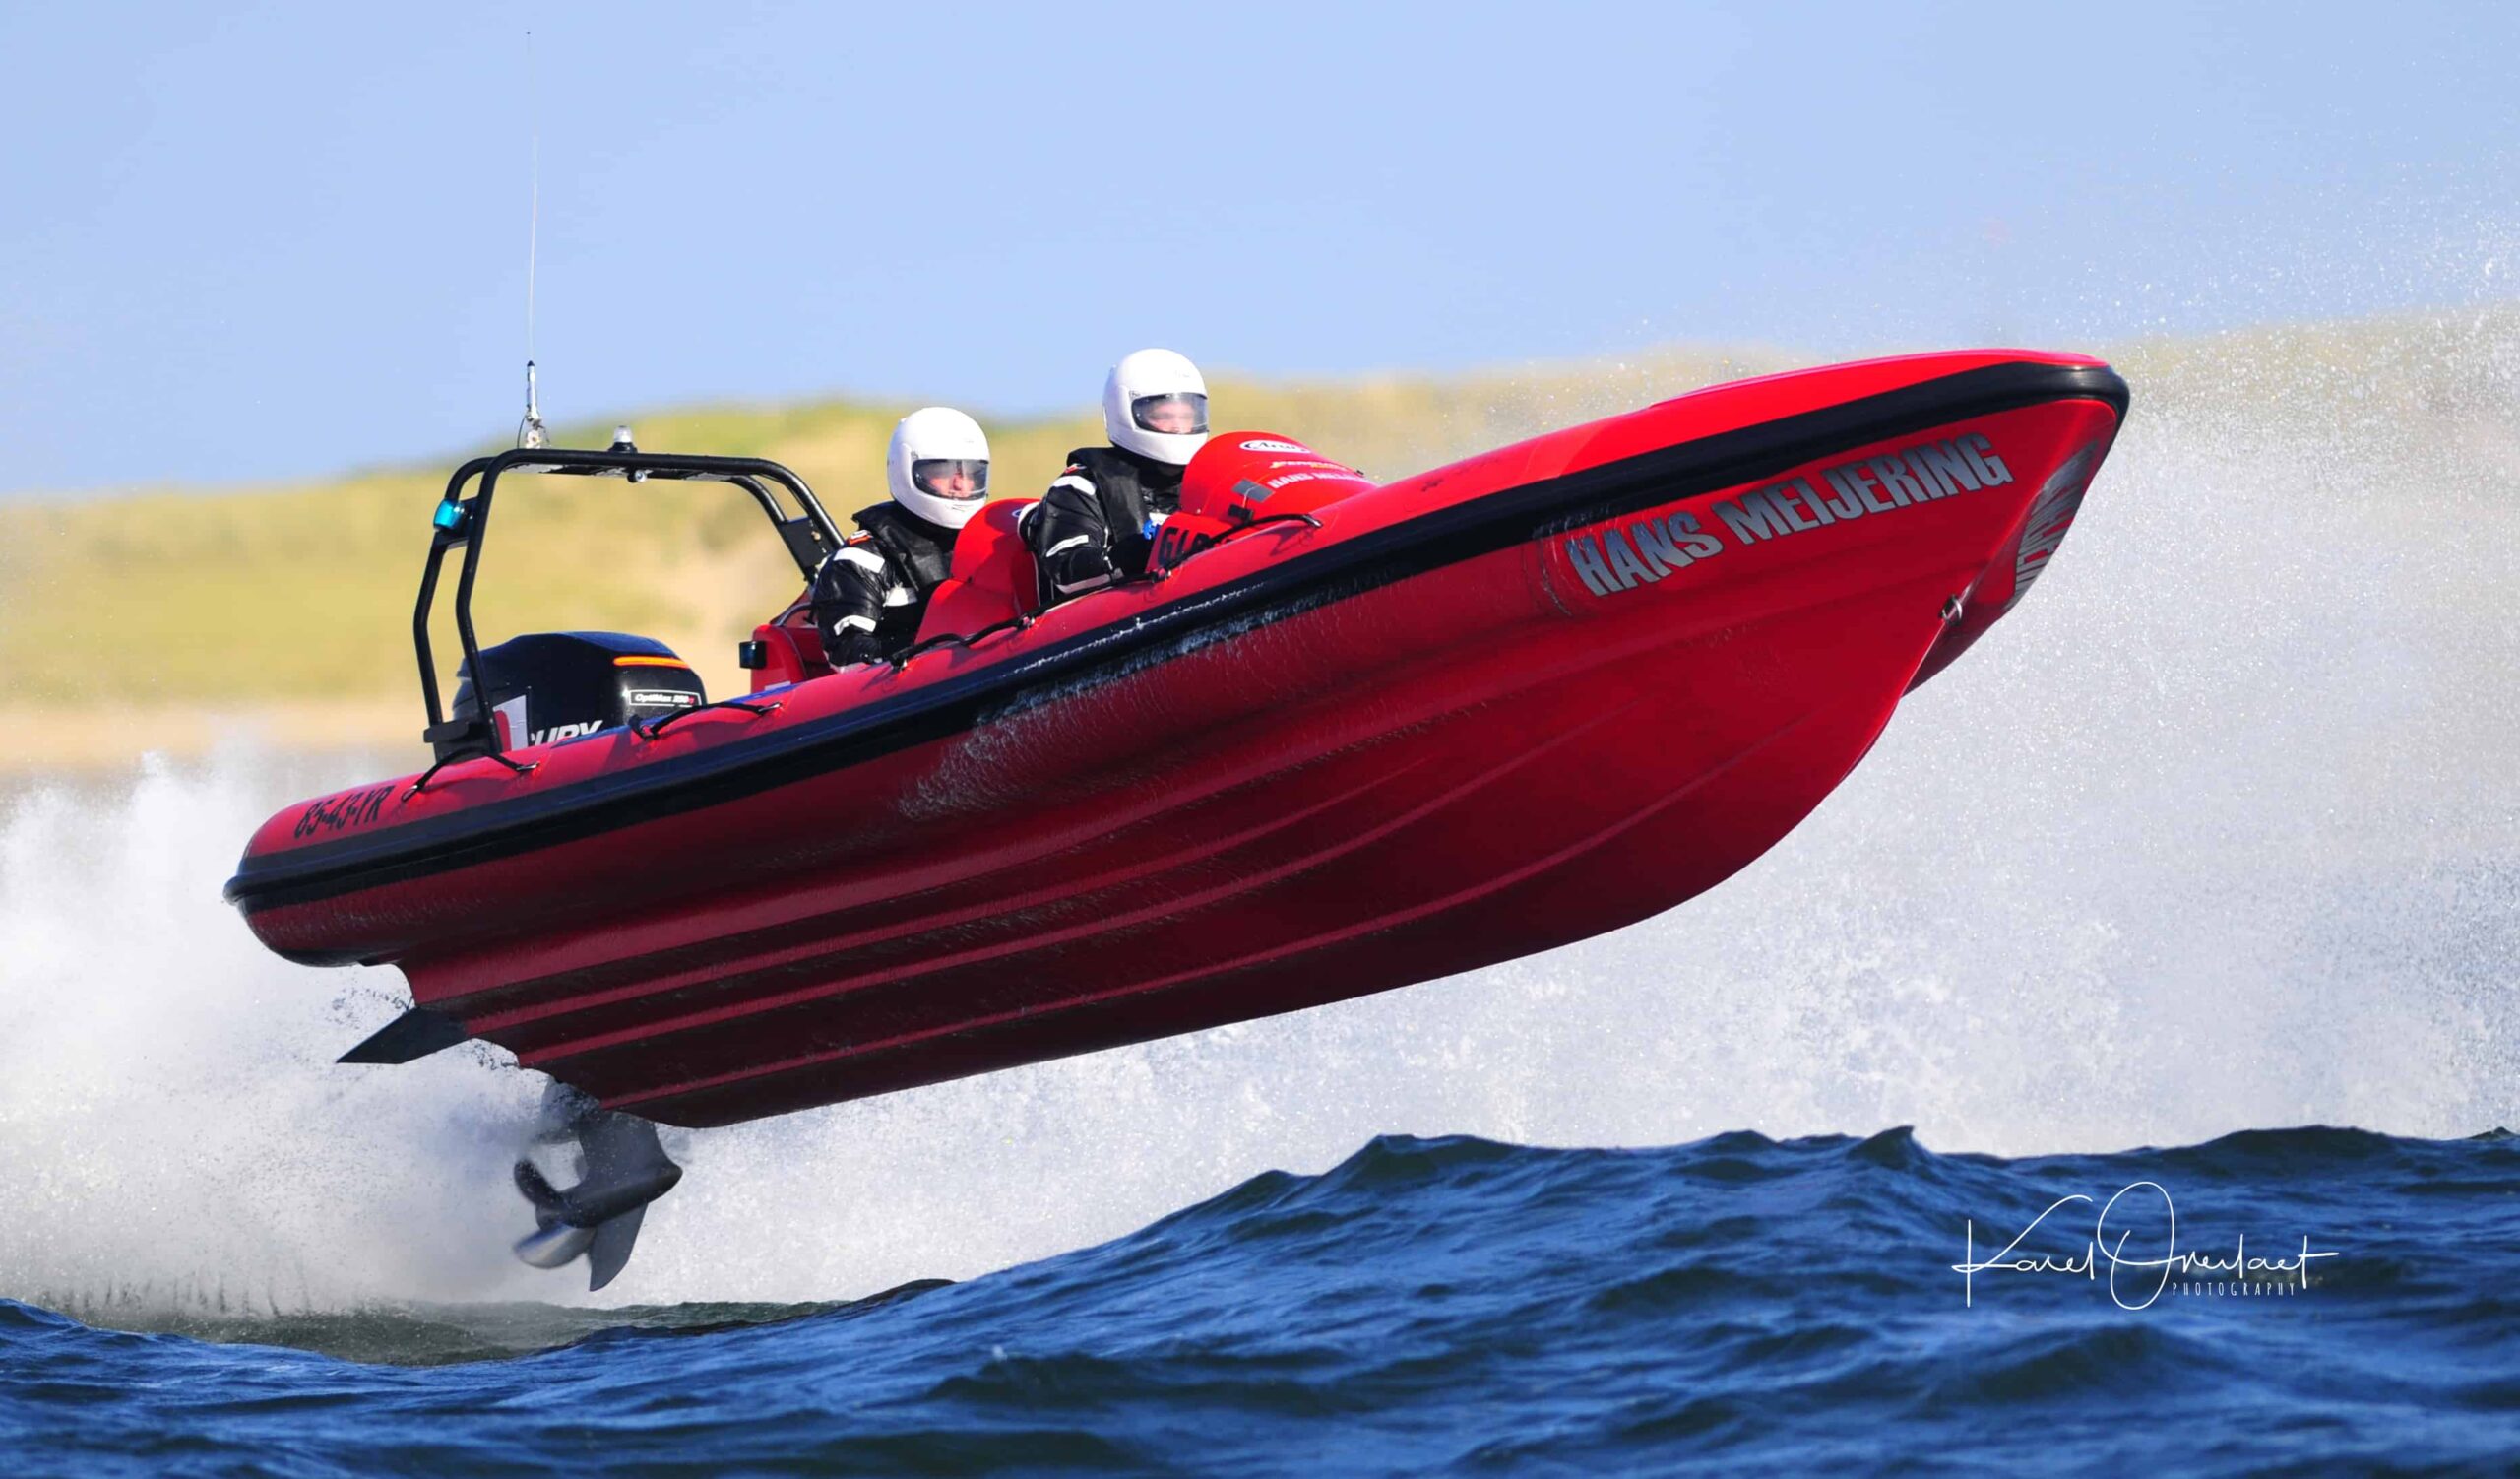 The Fun of Owning a Rigid Inflatable Boat (RIB) @ RIBs ONLY - Home of the Rigid Inflatable Boat